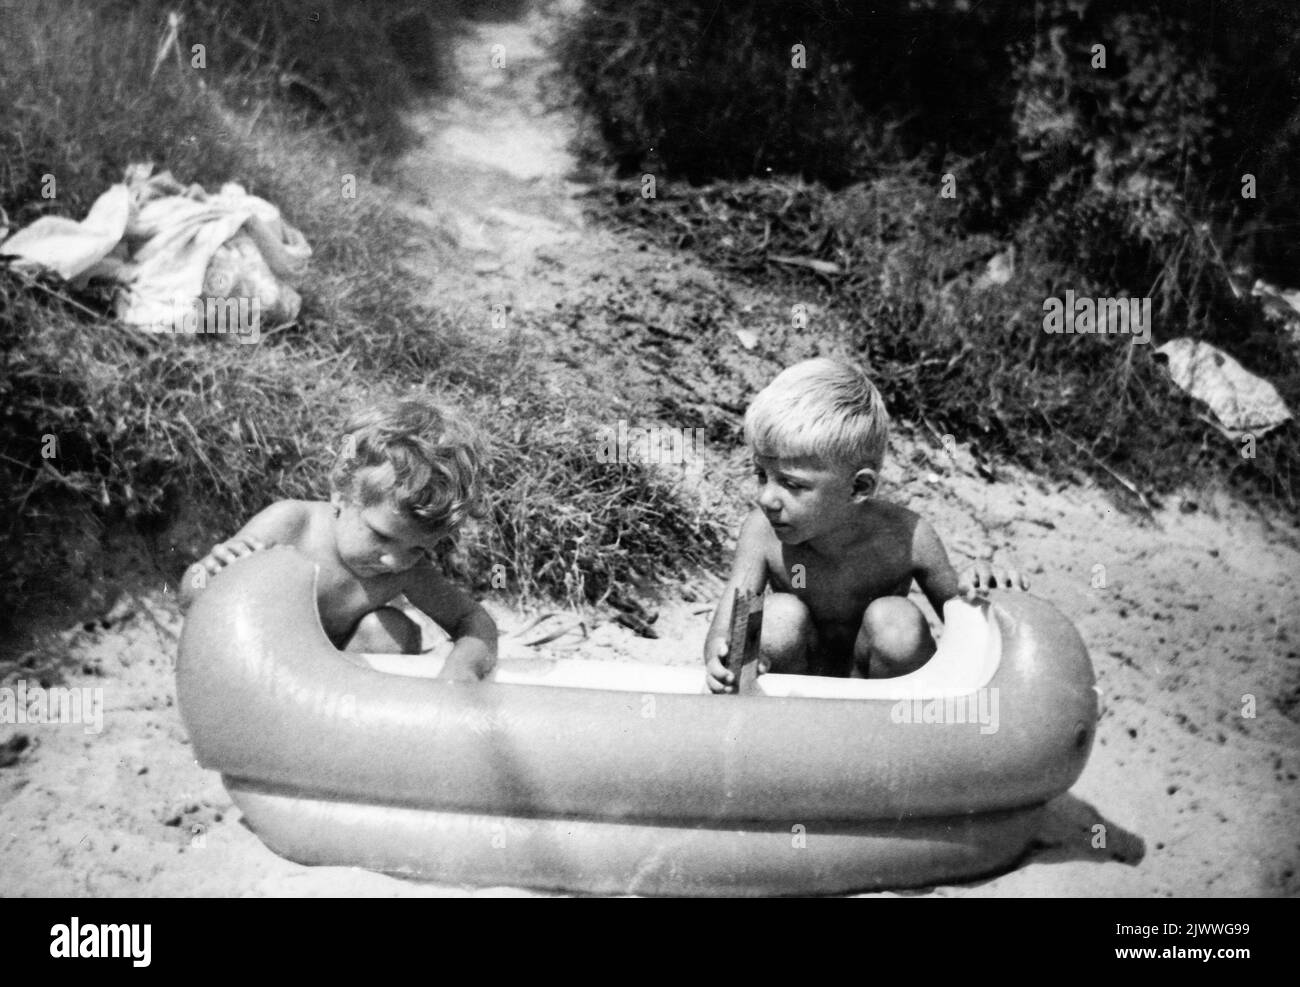 Siblings aged 2 and 4 years old playing on the beach with inflatable toy kiddy canoe Stock Photo